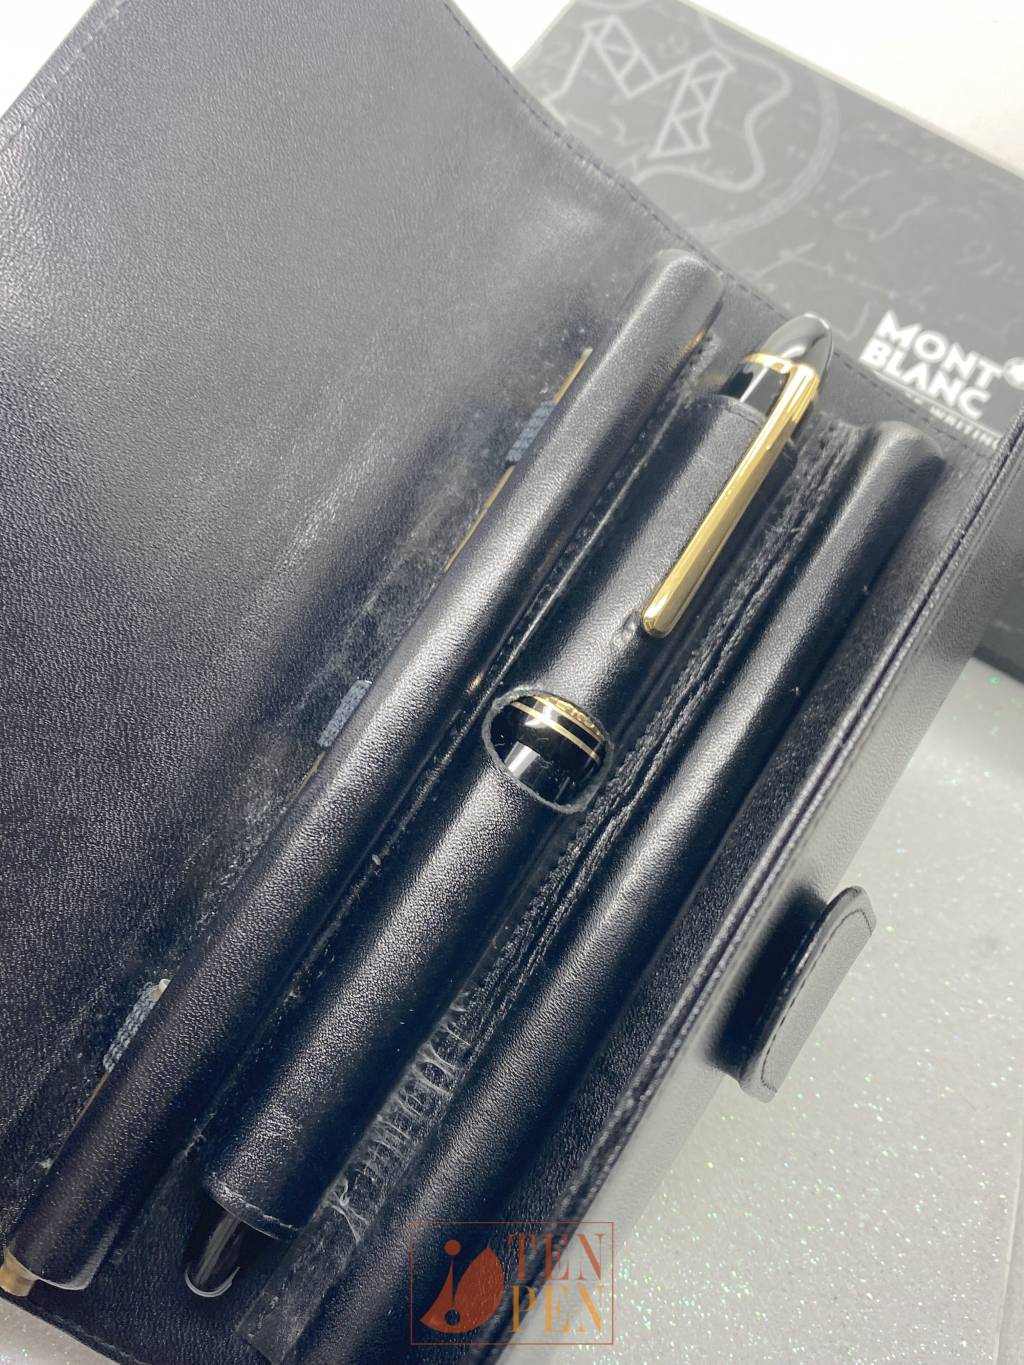 MONTBLANC 147 TRAVELLER - unused with leather case | Tenpen - By